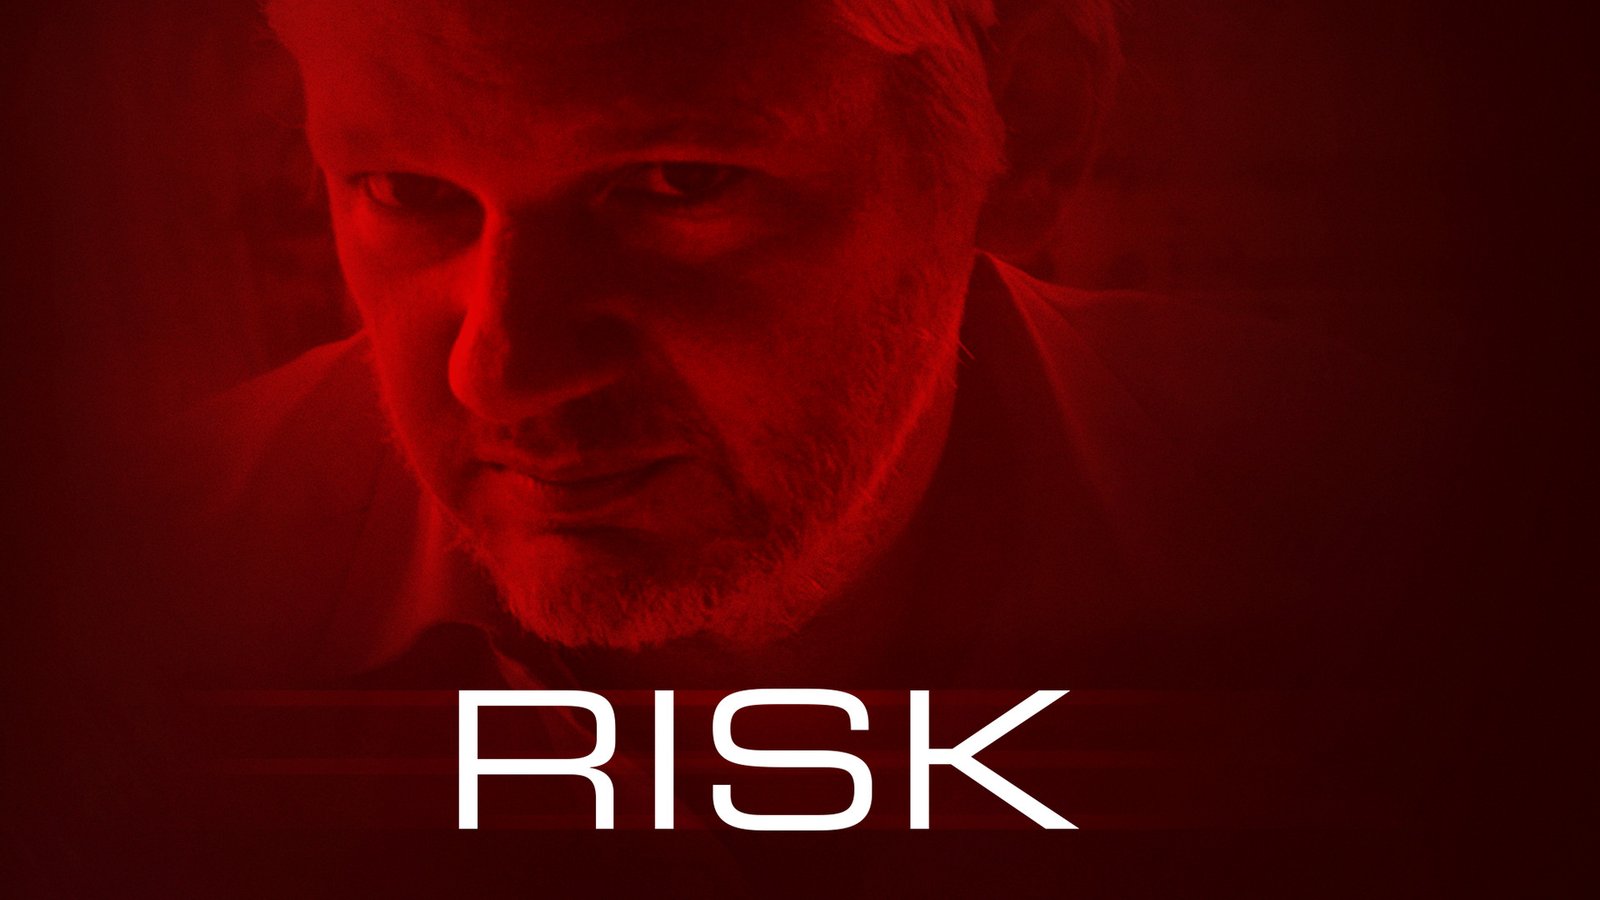 Risk - One of the Most Controversial Figures of Our Time, Julian Assange